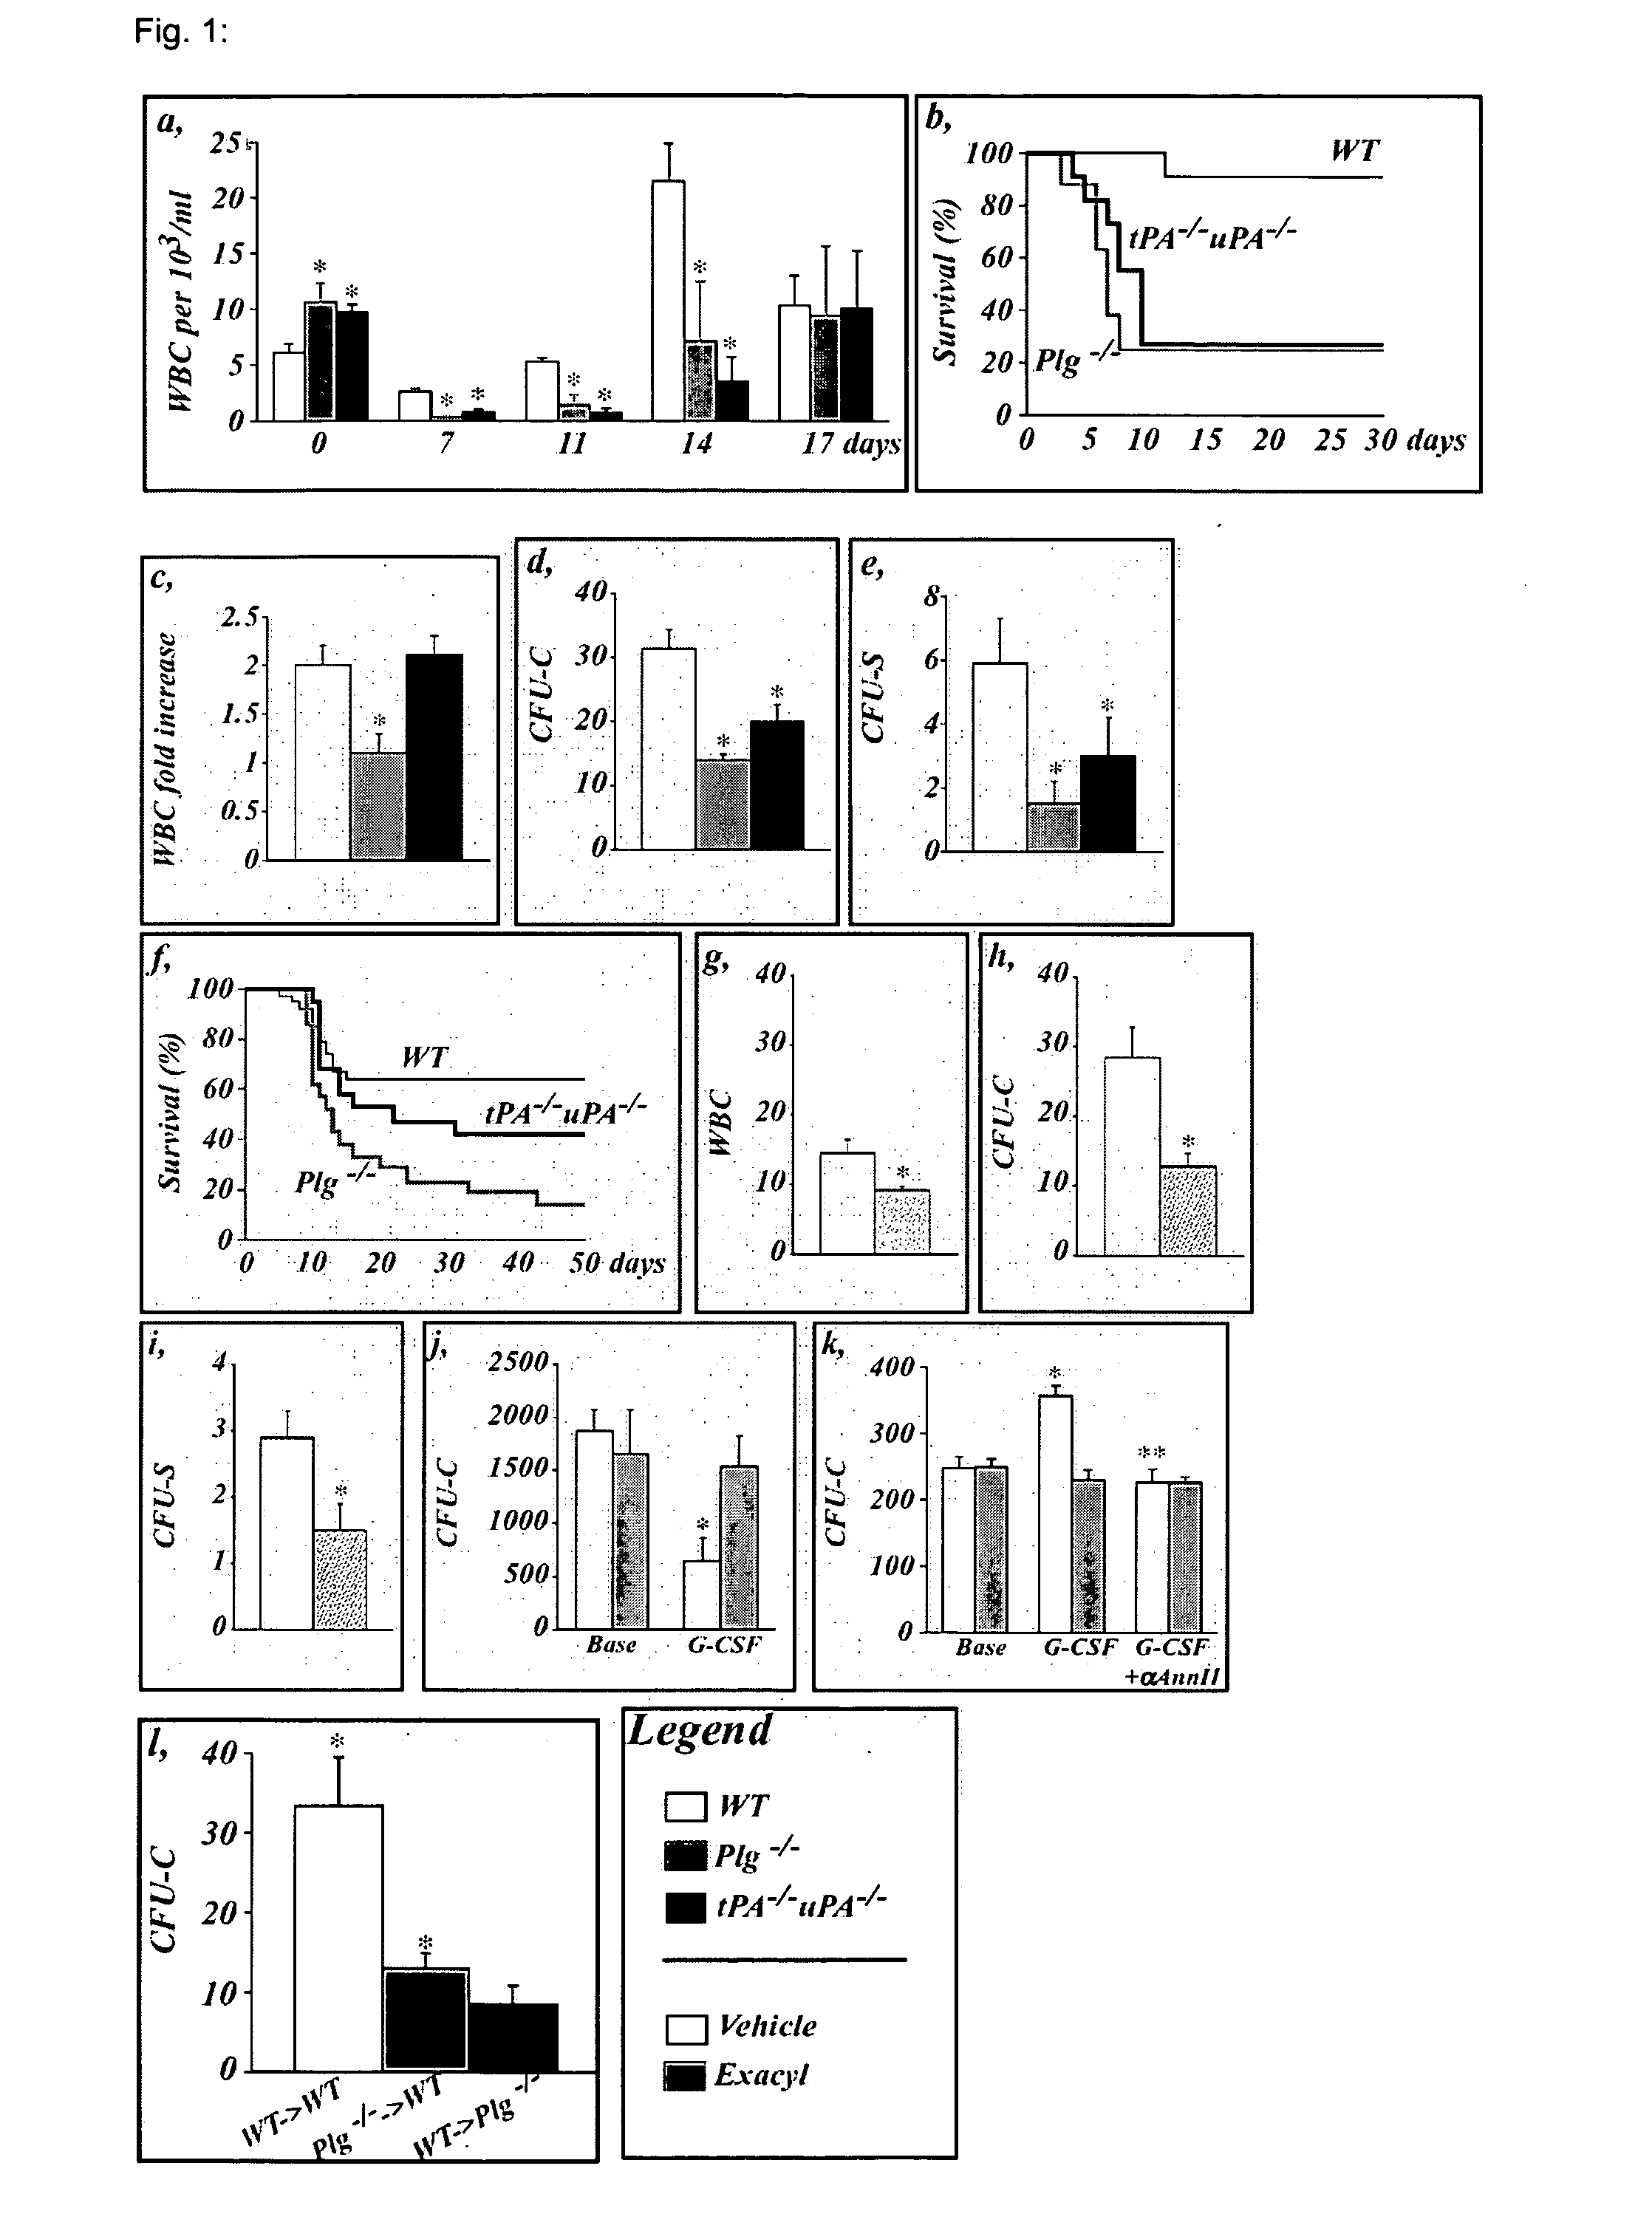 Means and methods for the recruitment and identification of stem cells